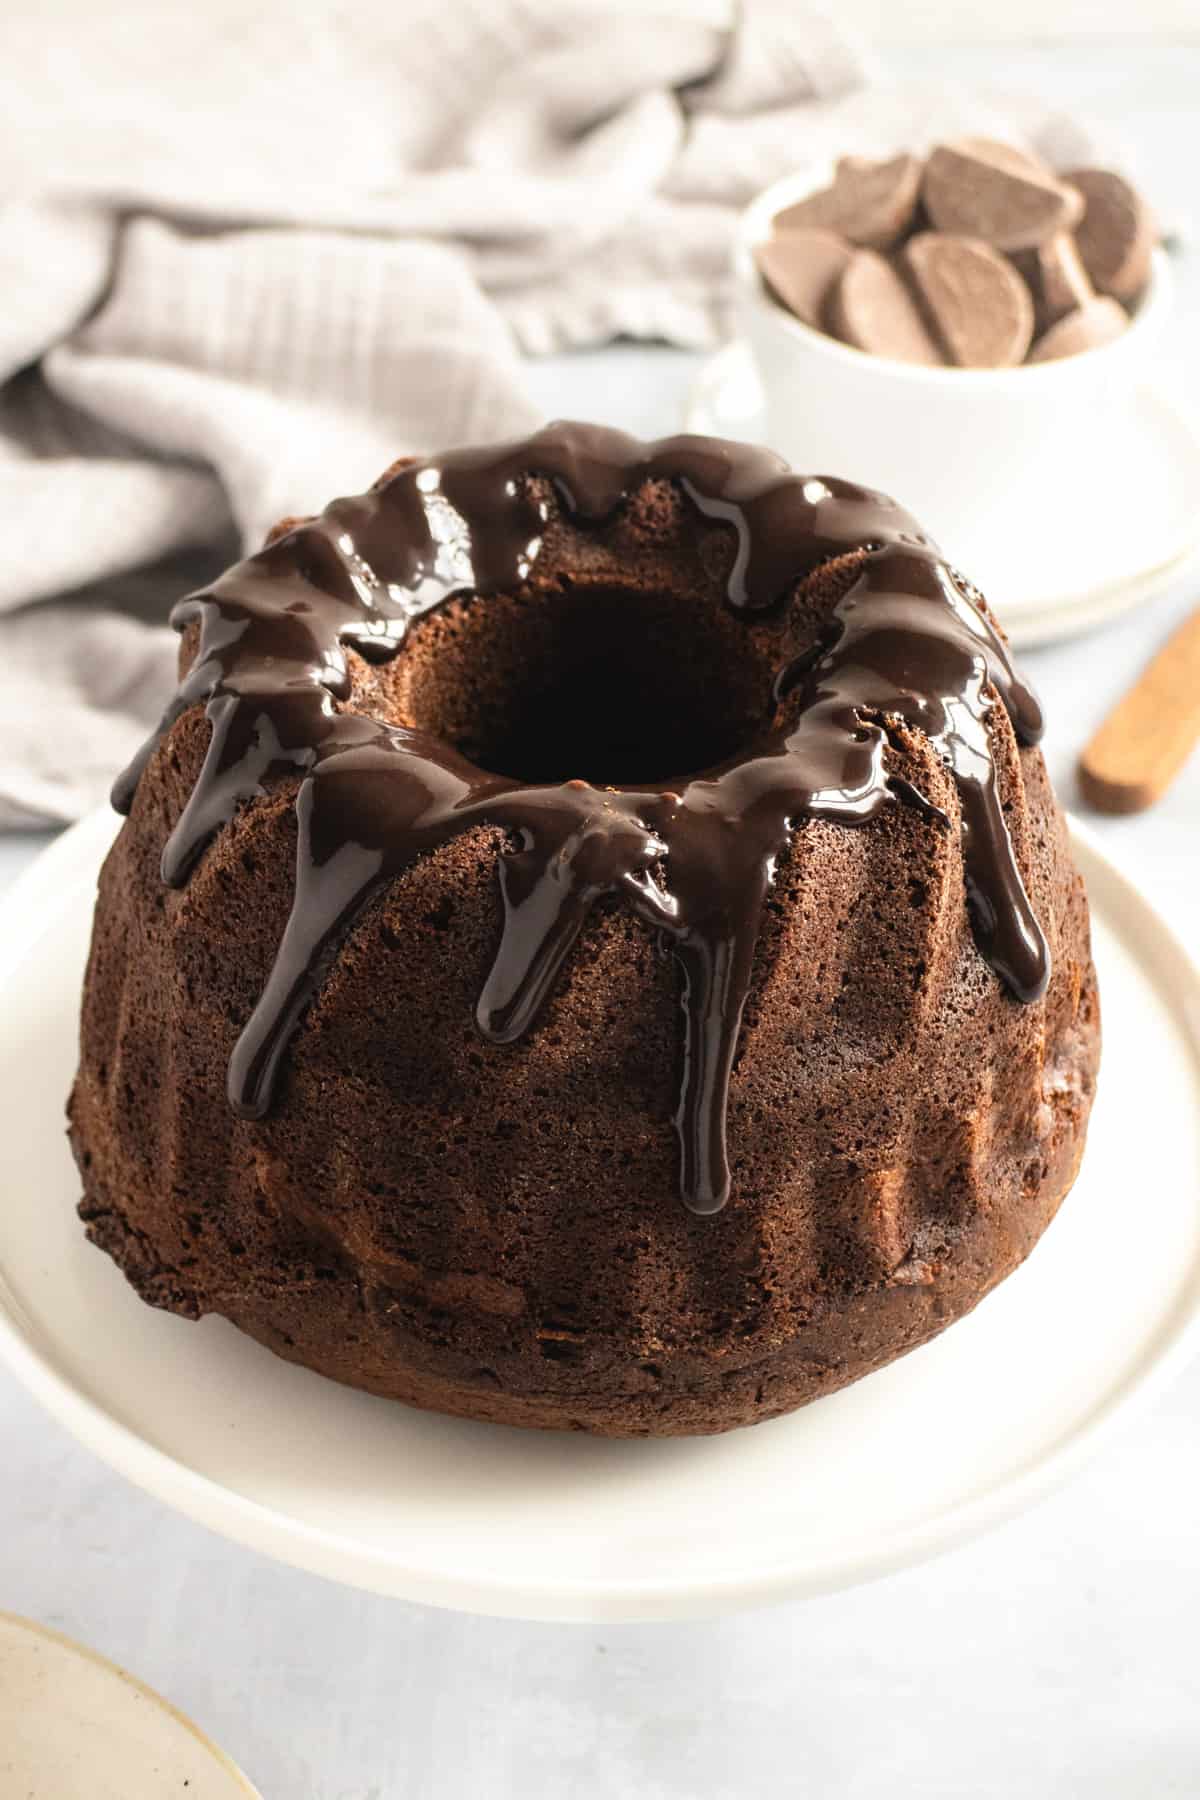 Chocolate glaze drizzled over the top of a cake